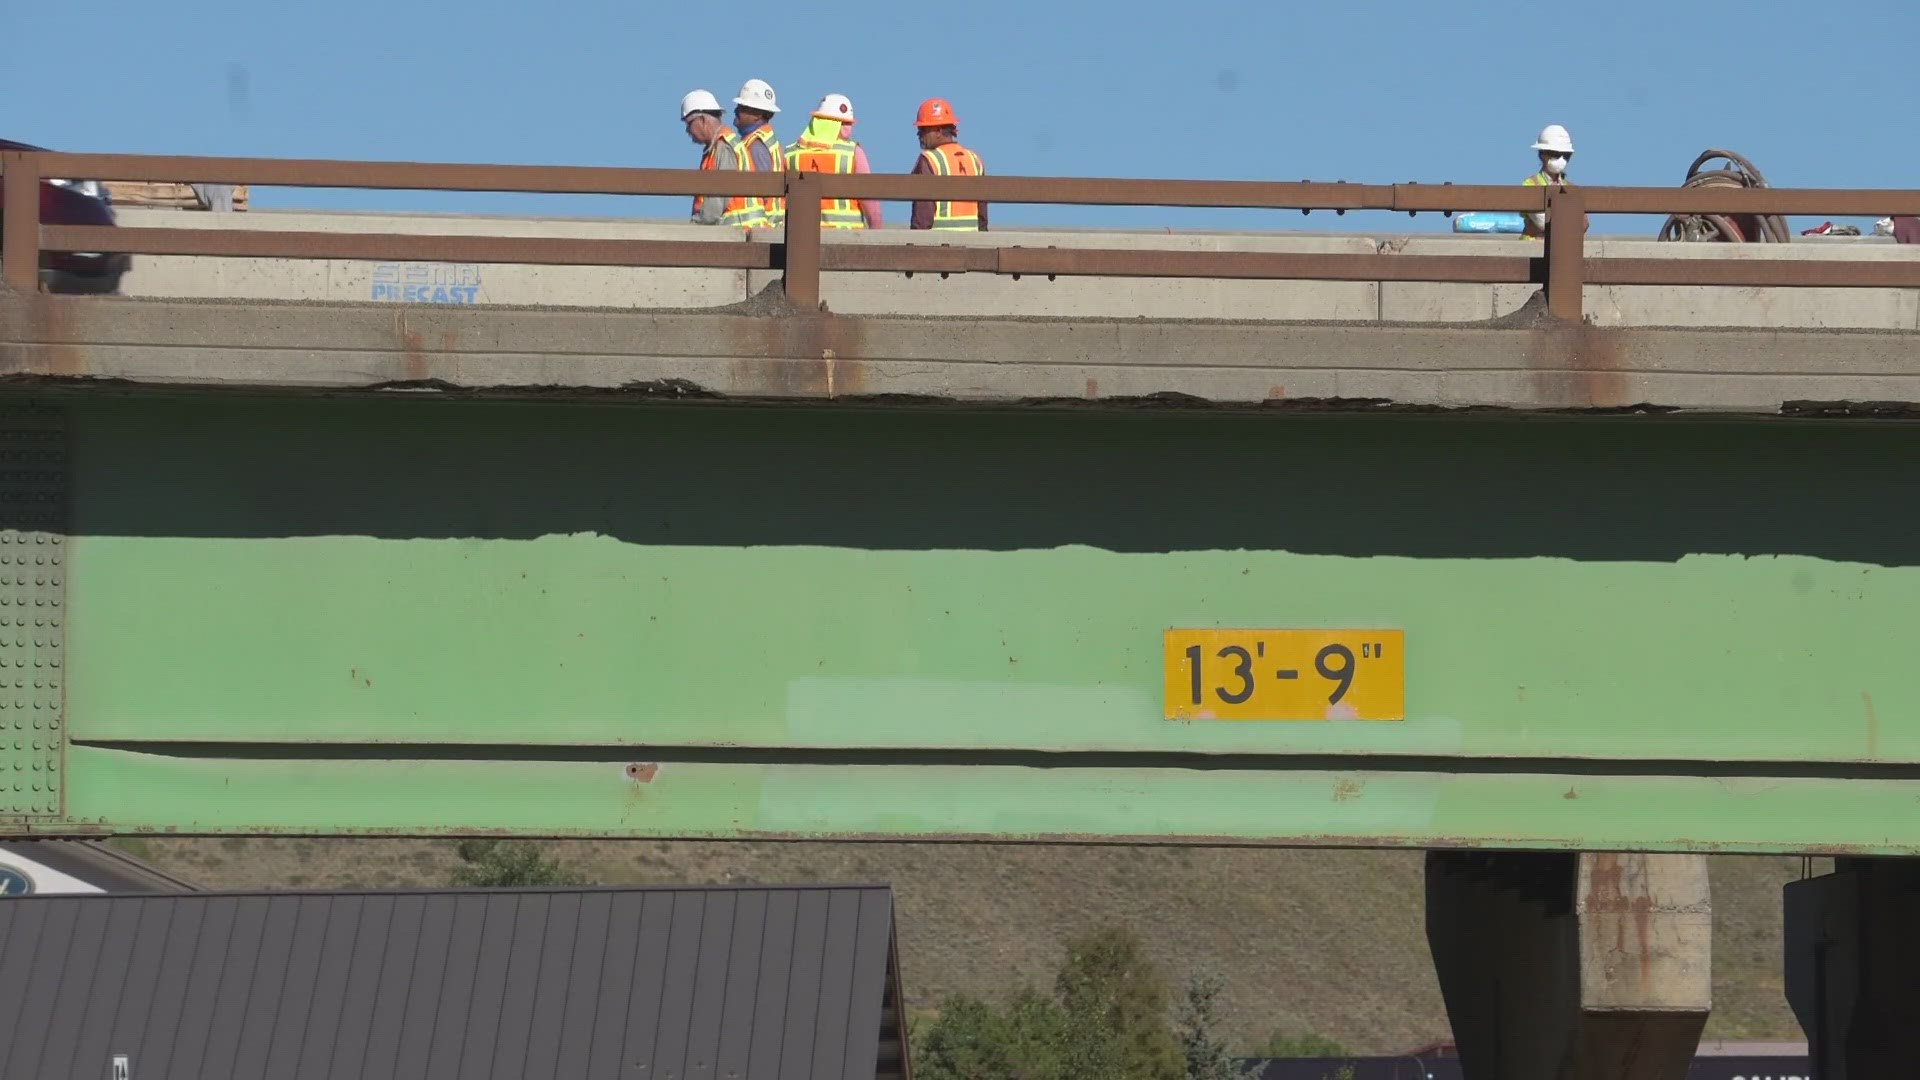 The Colorado Department of Transportation has been making safety improvements to a section of I-70 between Silverthorne and Frisco.